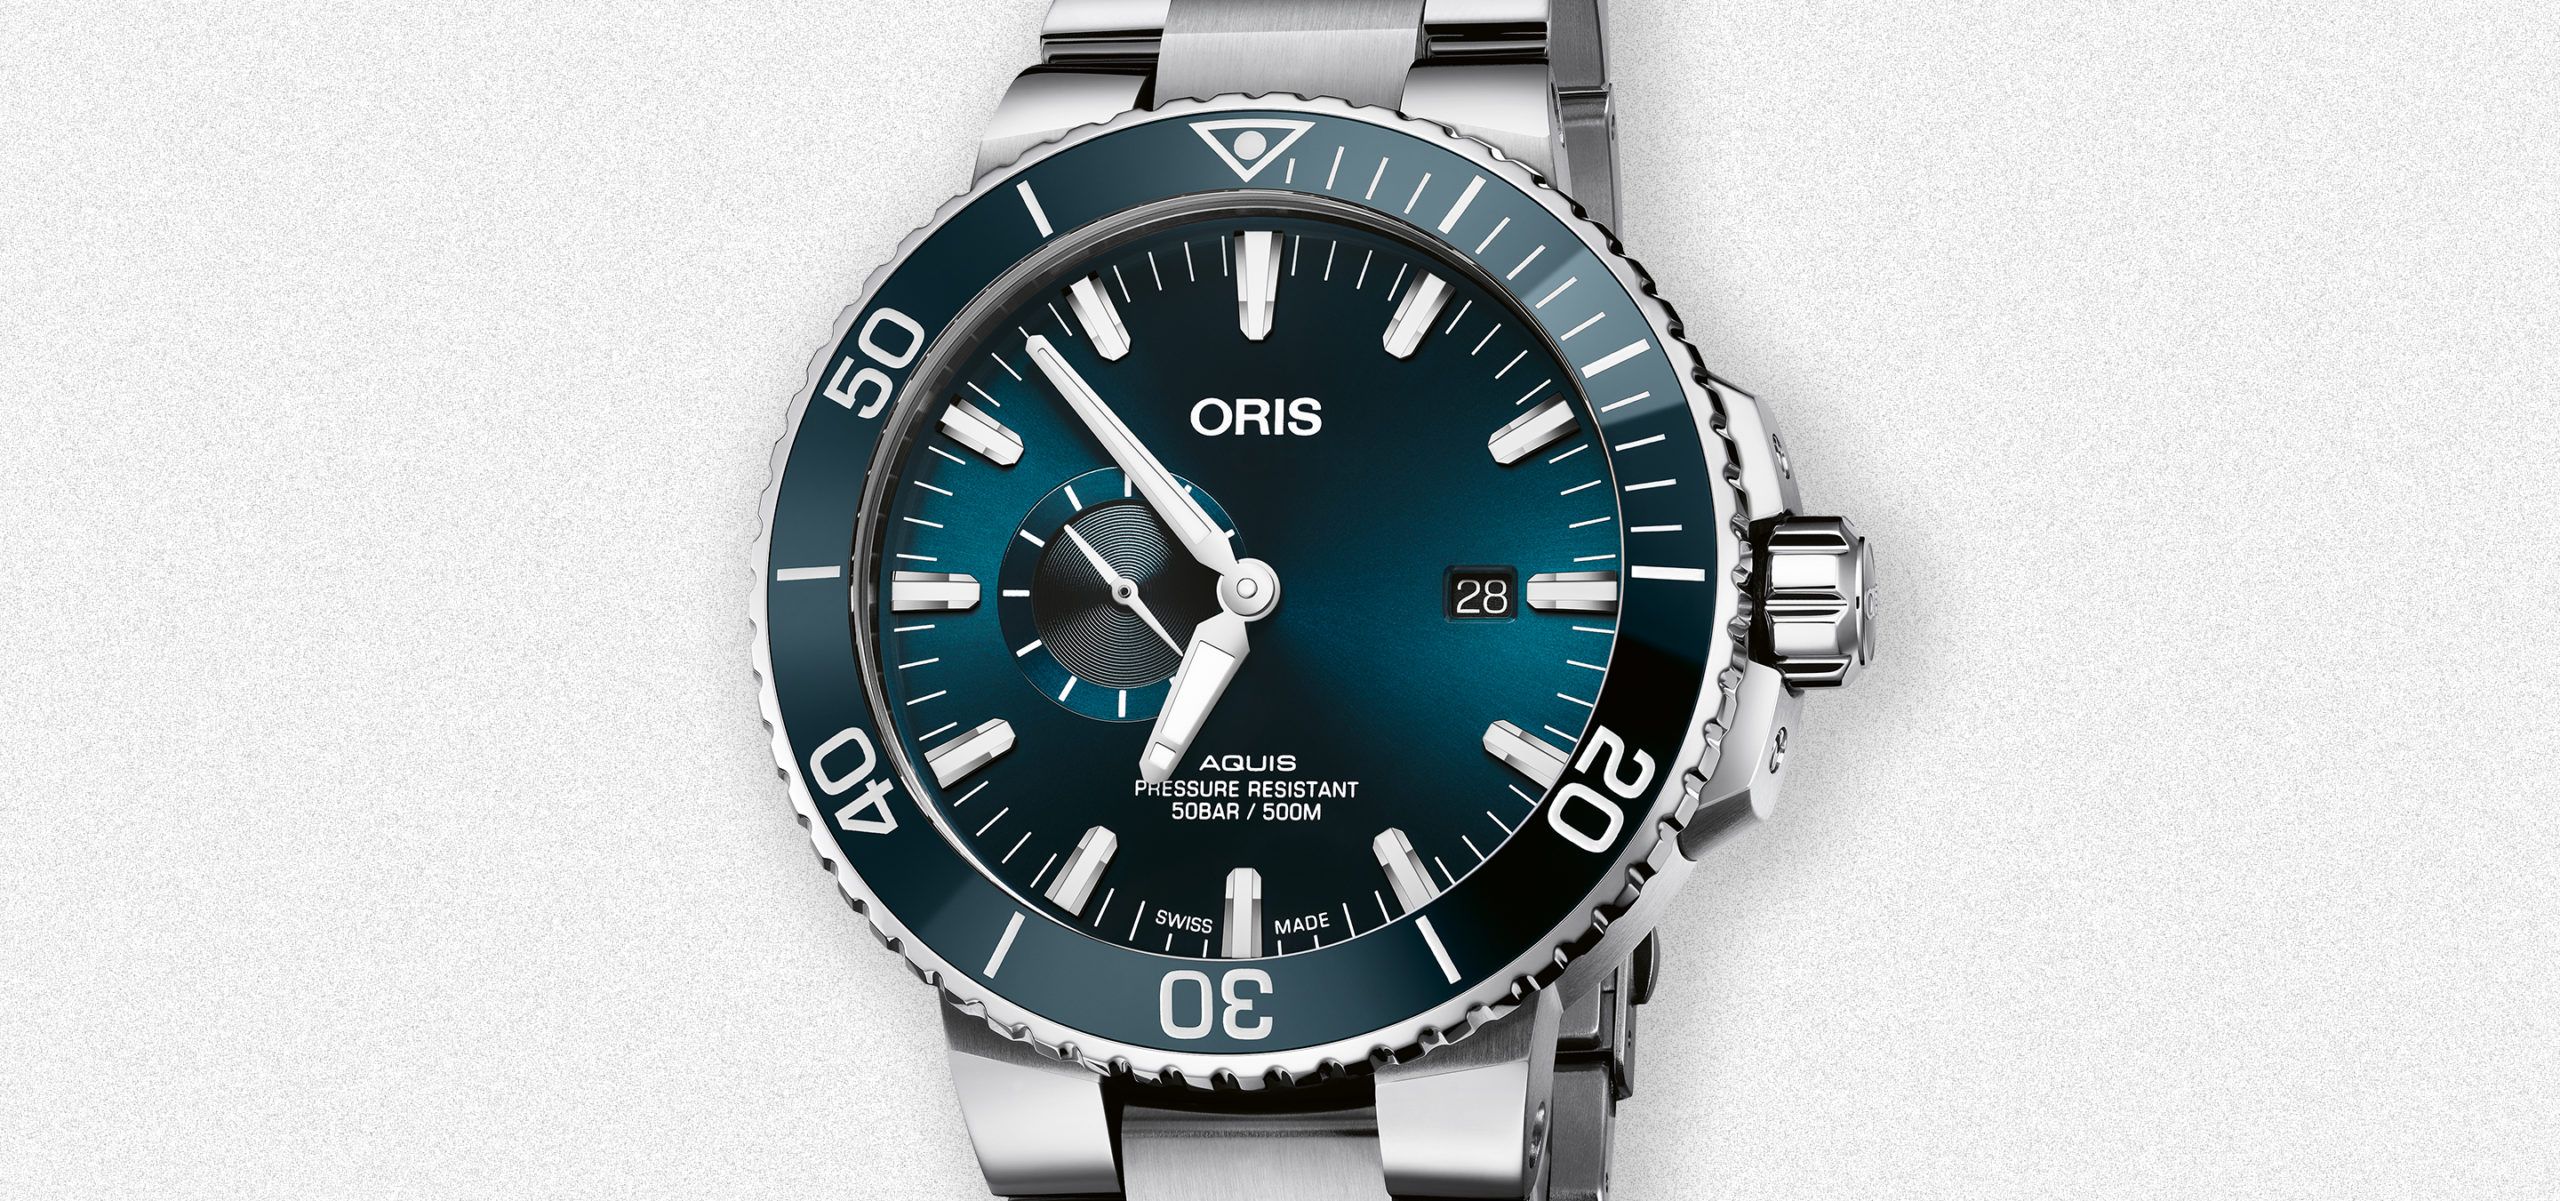 Diving Deeper: Introducing The Oris Aquis Small Second Date